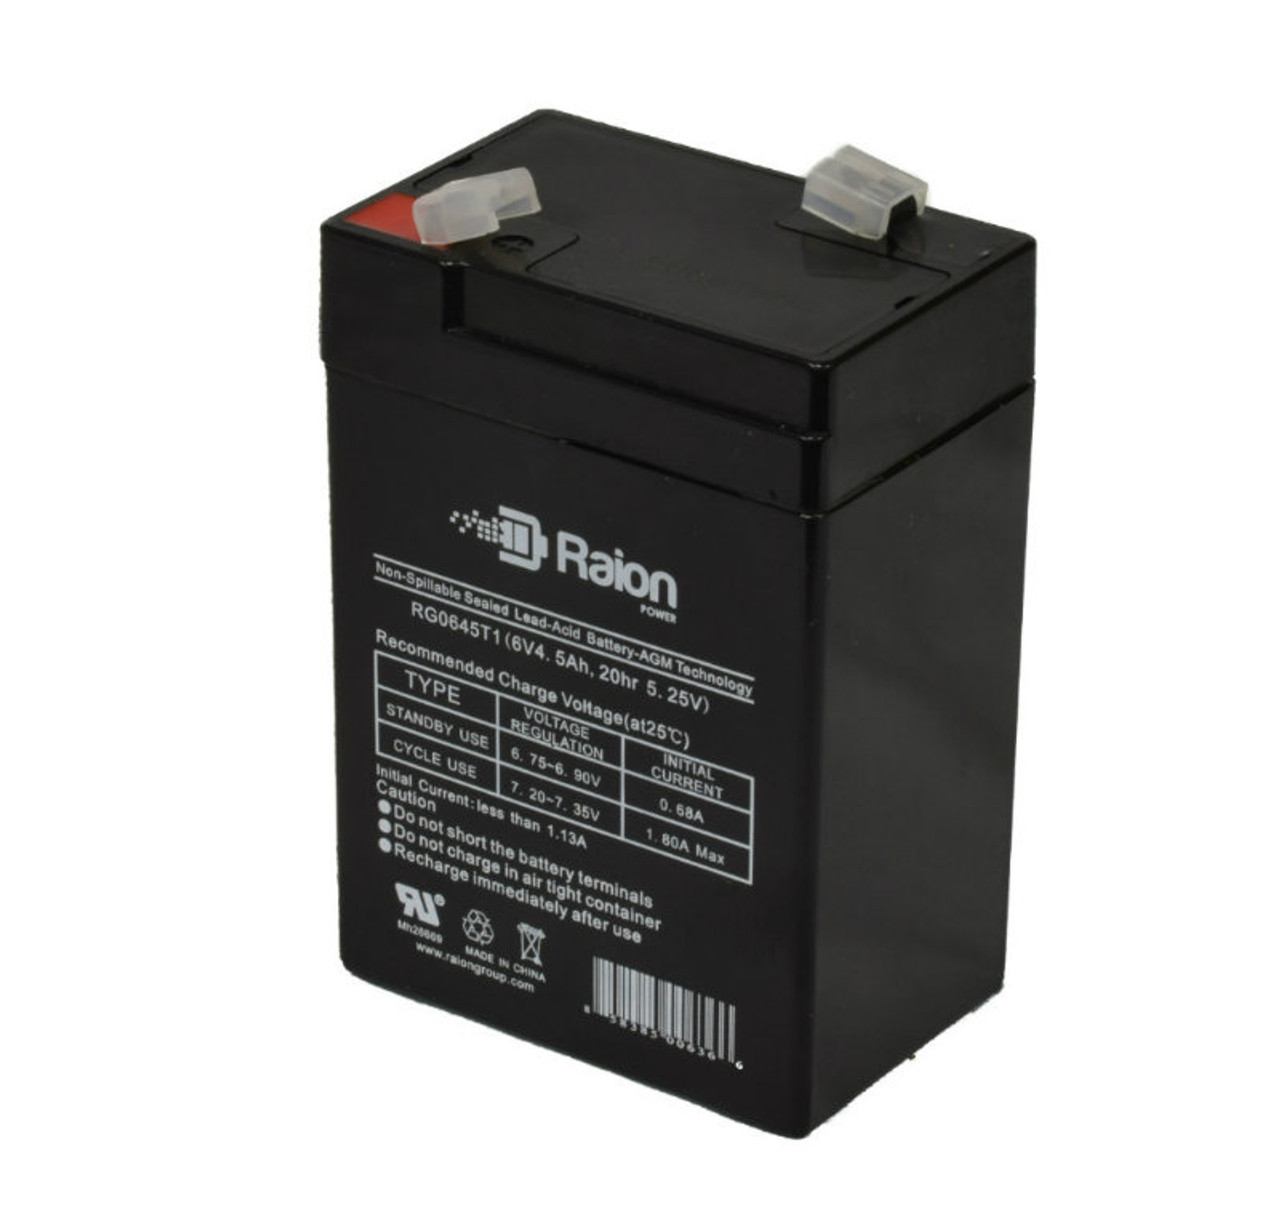 Raion Power RG0645T1 6V 4.5Ah Replacement Battery Cartridge for Kung Long WP4.5-6